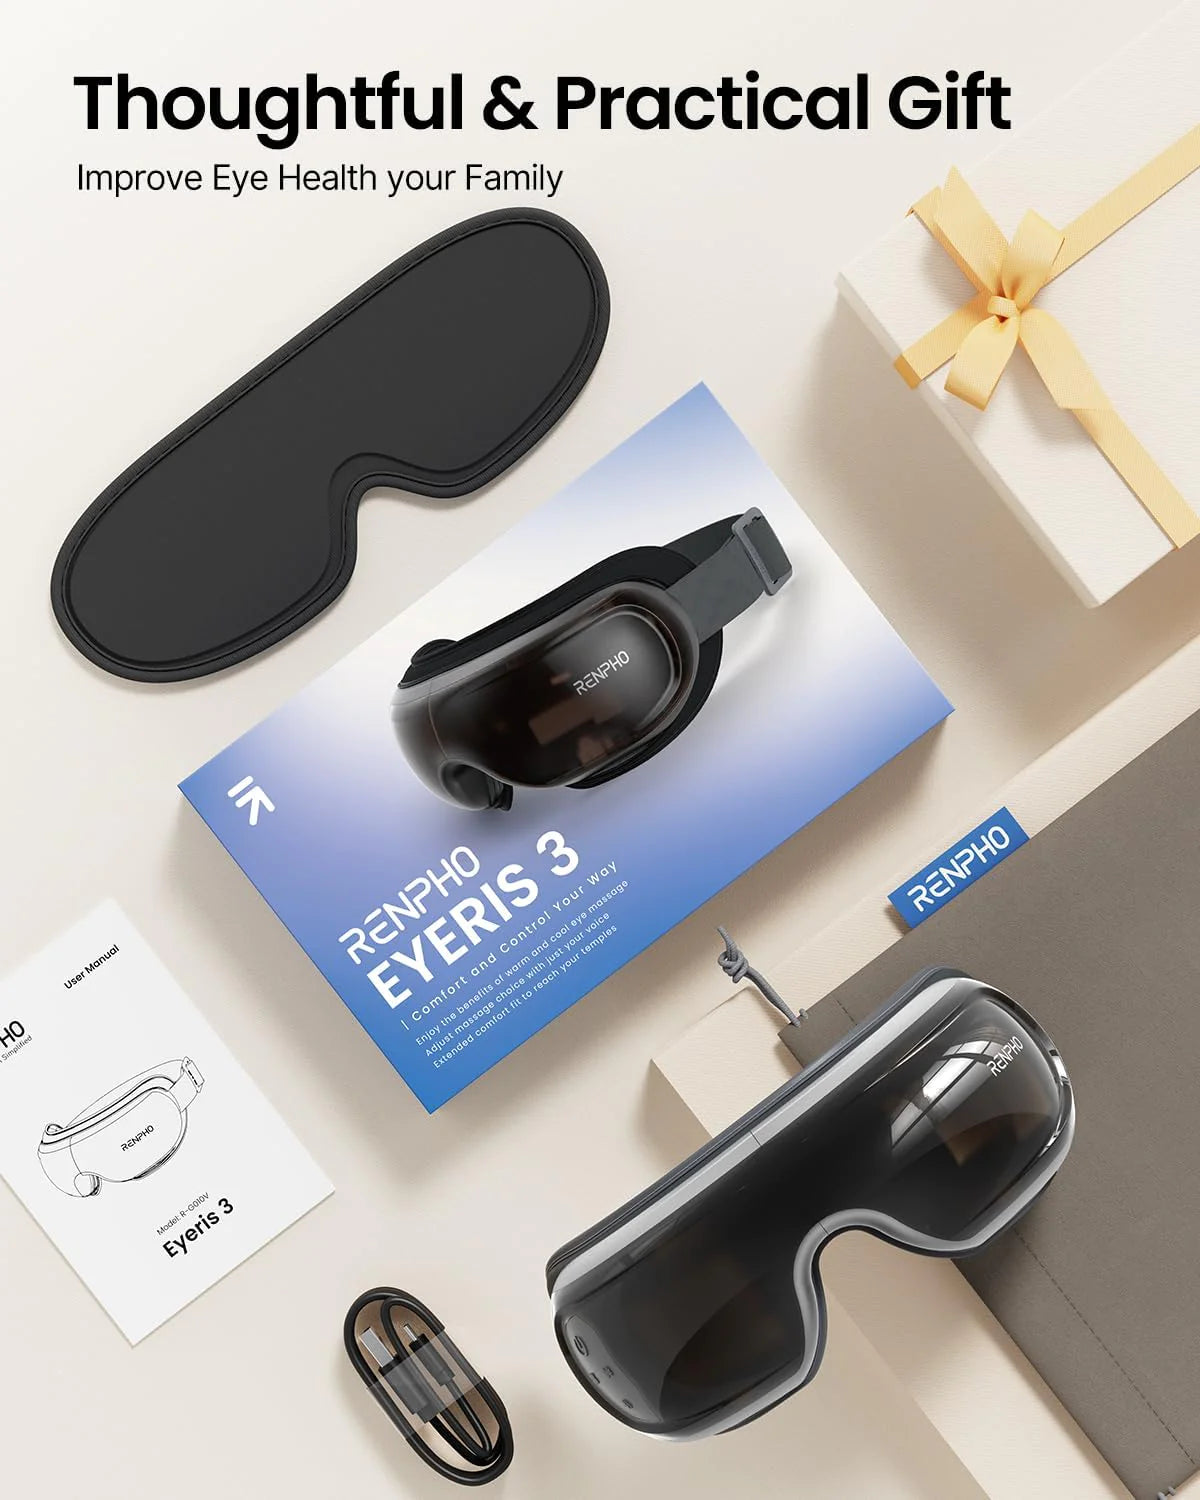 A Renpho EU Eyeris 3 Eye Massager set is displayed, including the massager, a black sleep mask, a user manual, a charging cable, and a gift box with a bow. The text "Thoughtful & Practical Gift: Improve Eye Health for your Family" appears at the top of the image. Enjoy personalized eye care with this innovative device.